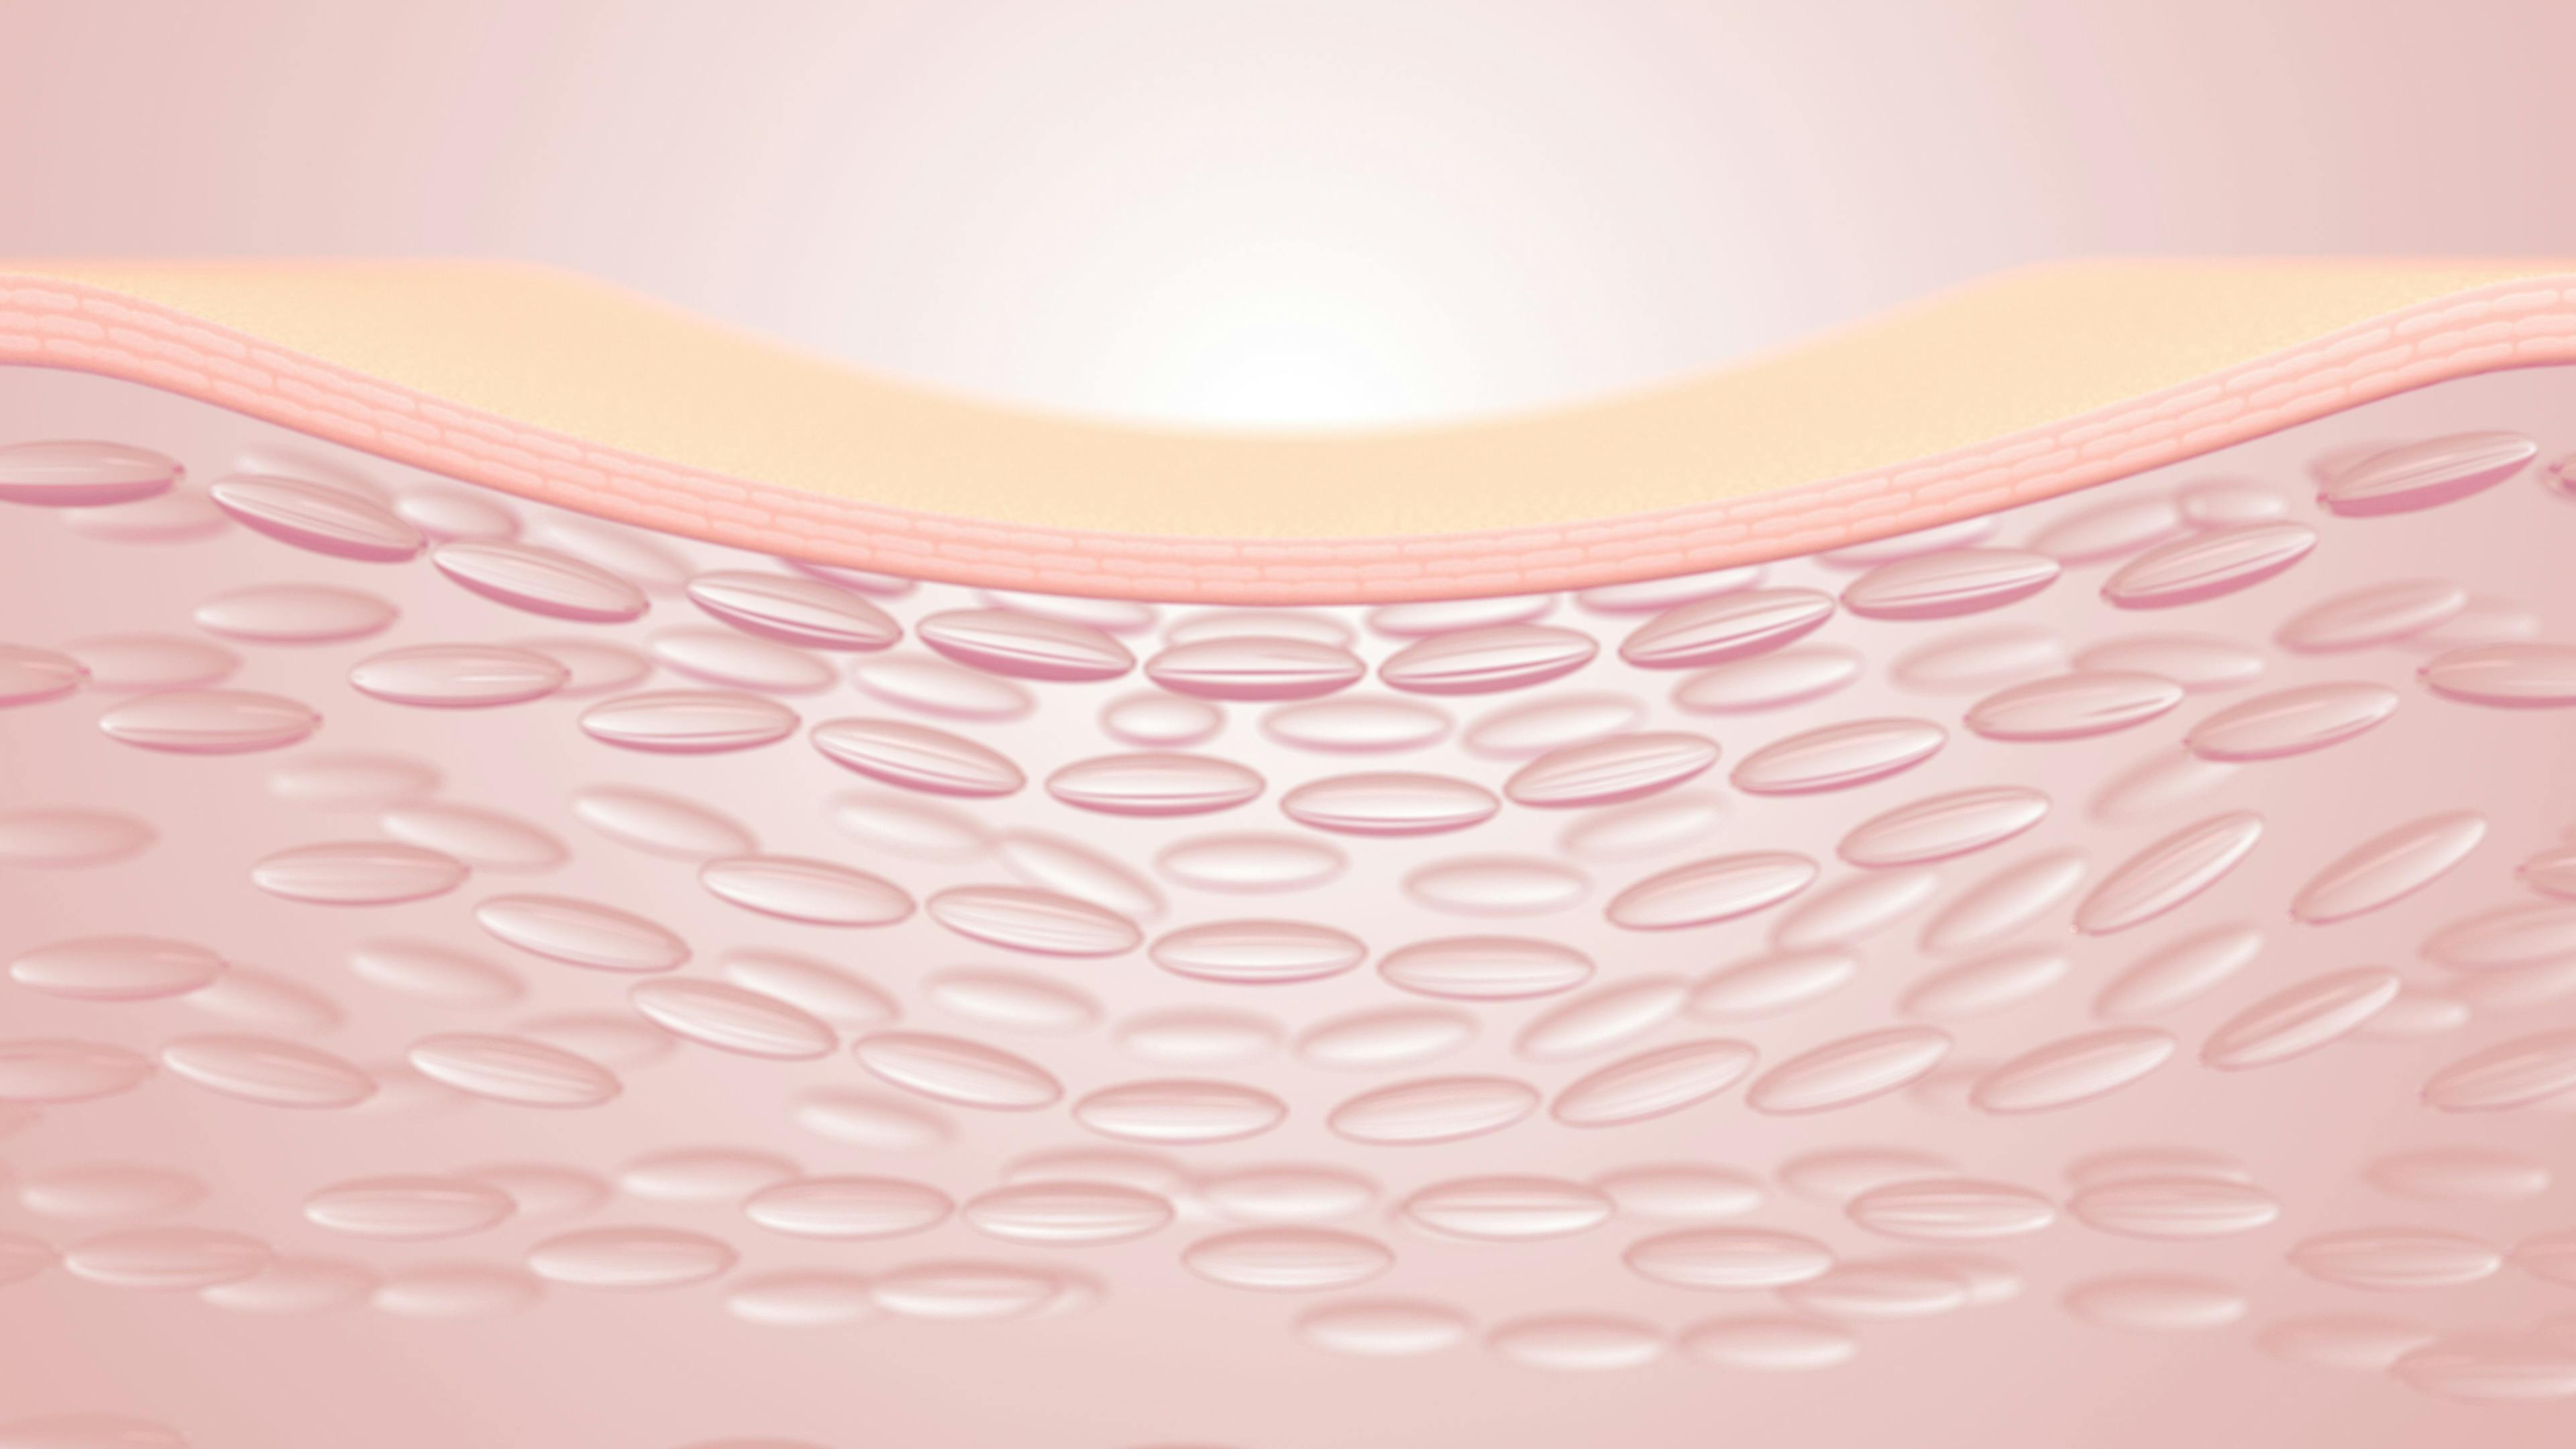 Skin Changes, Thickness May Aid in Early Acromelagy Detection